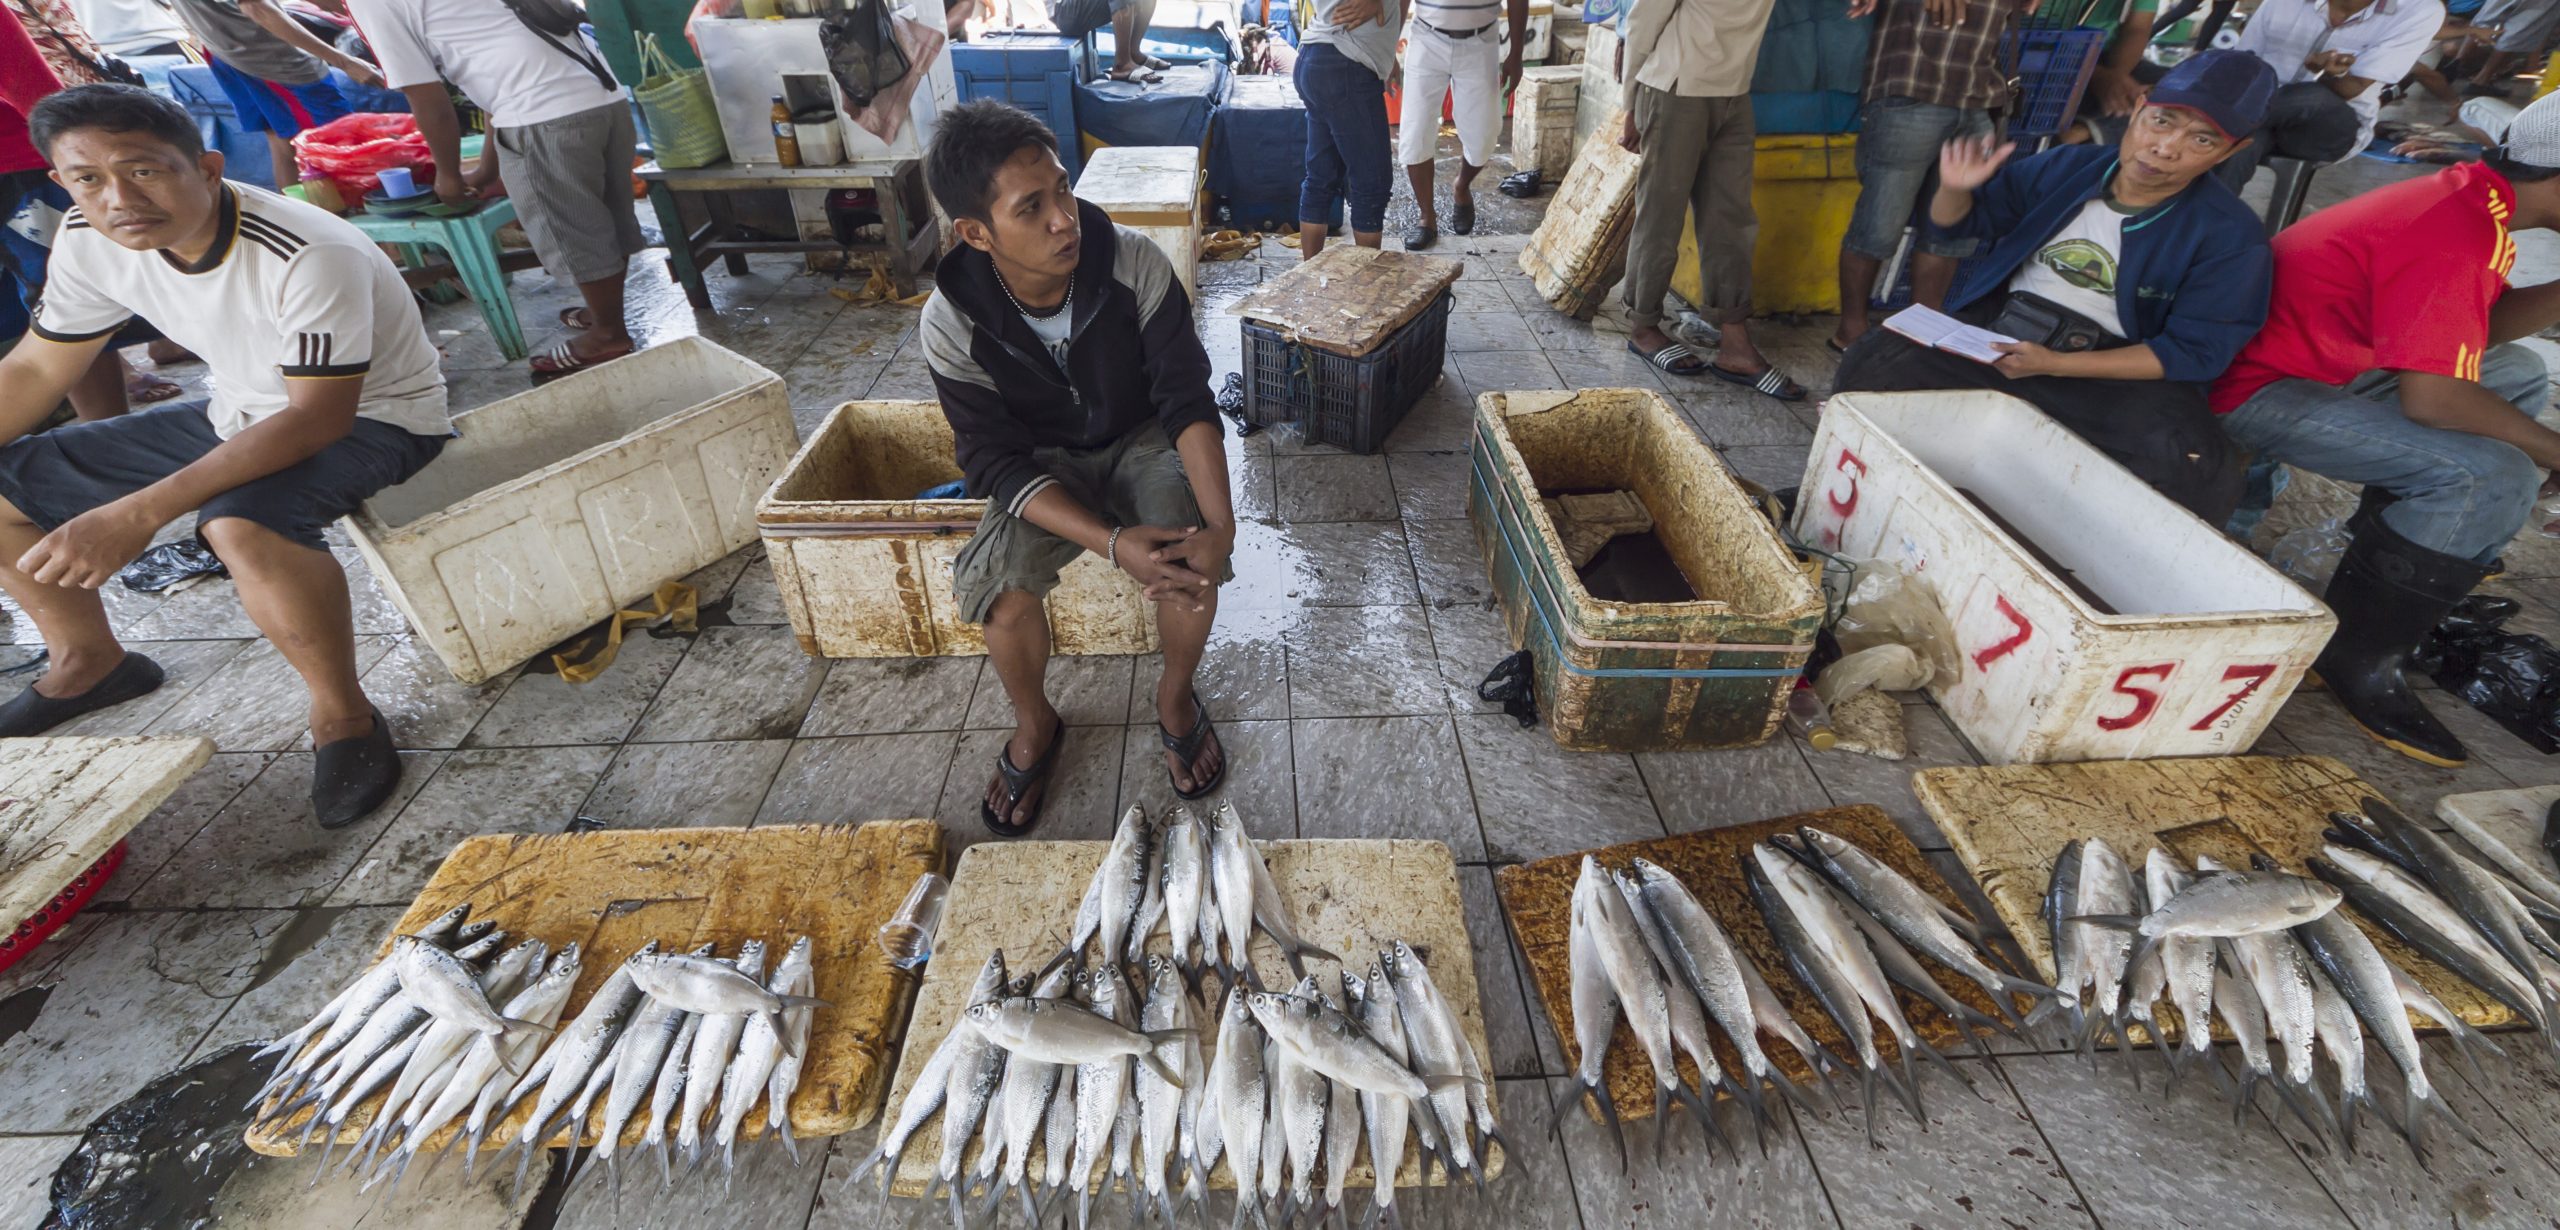 Fish from markets in Indonesia and California had similar levels of debris contamination. Photo by Design Pics/Corbis